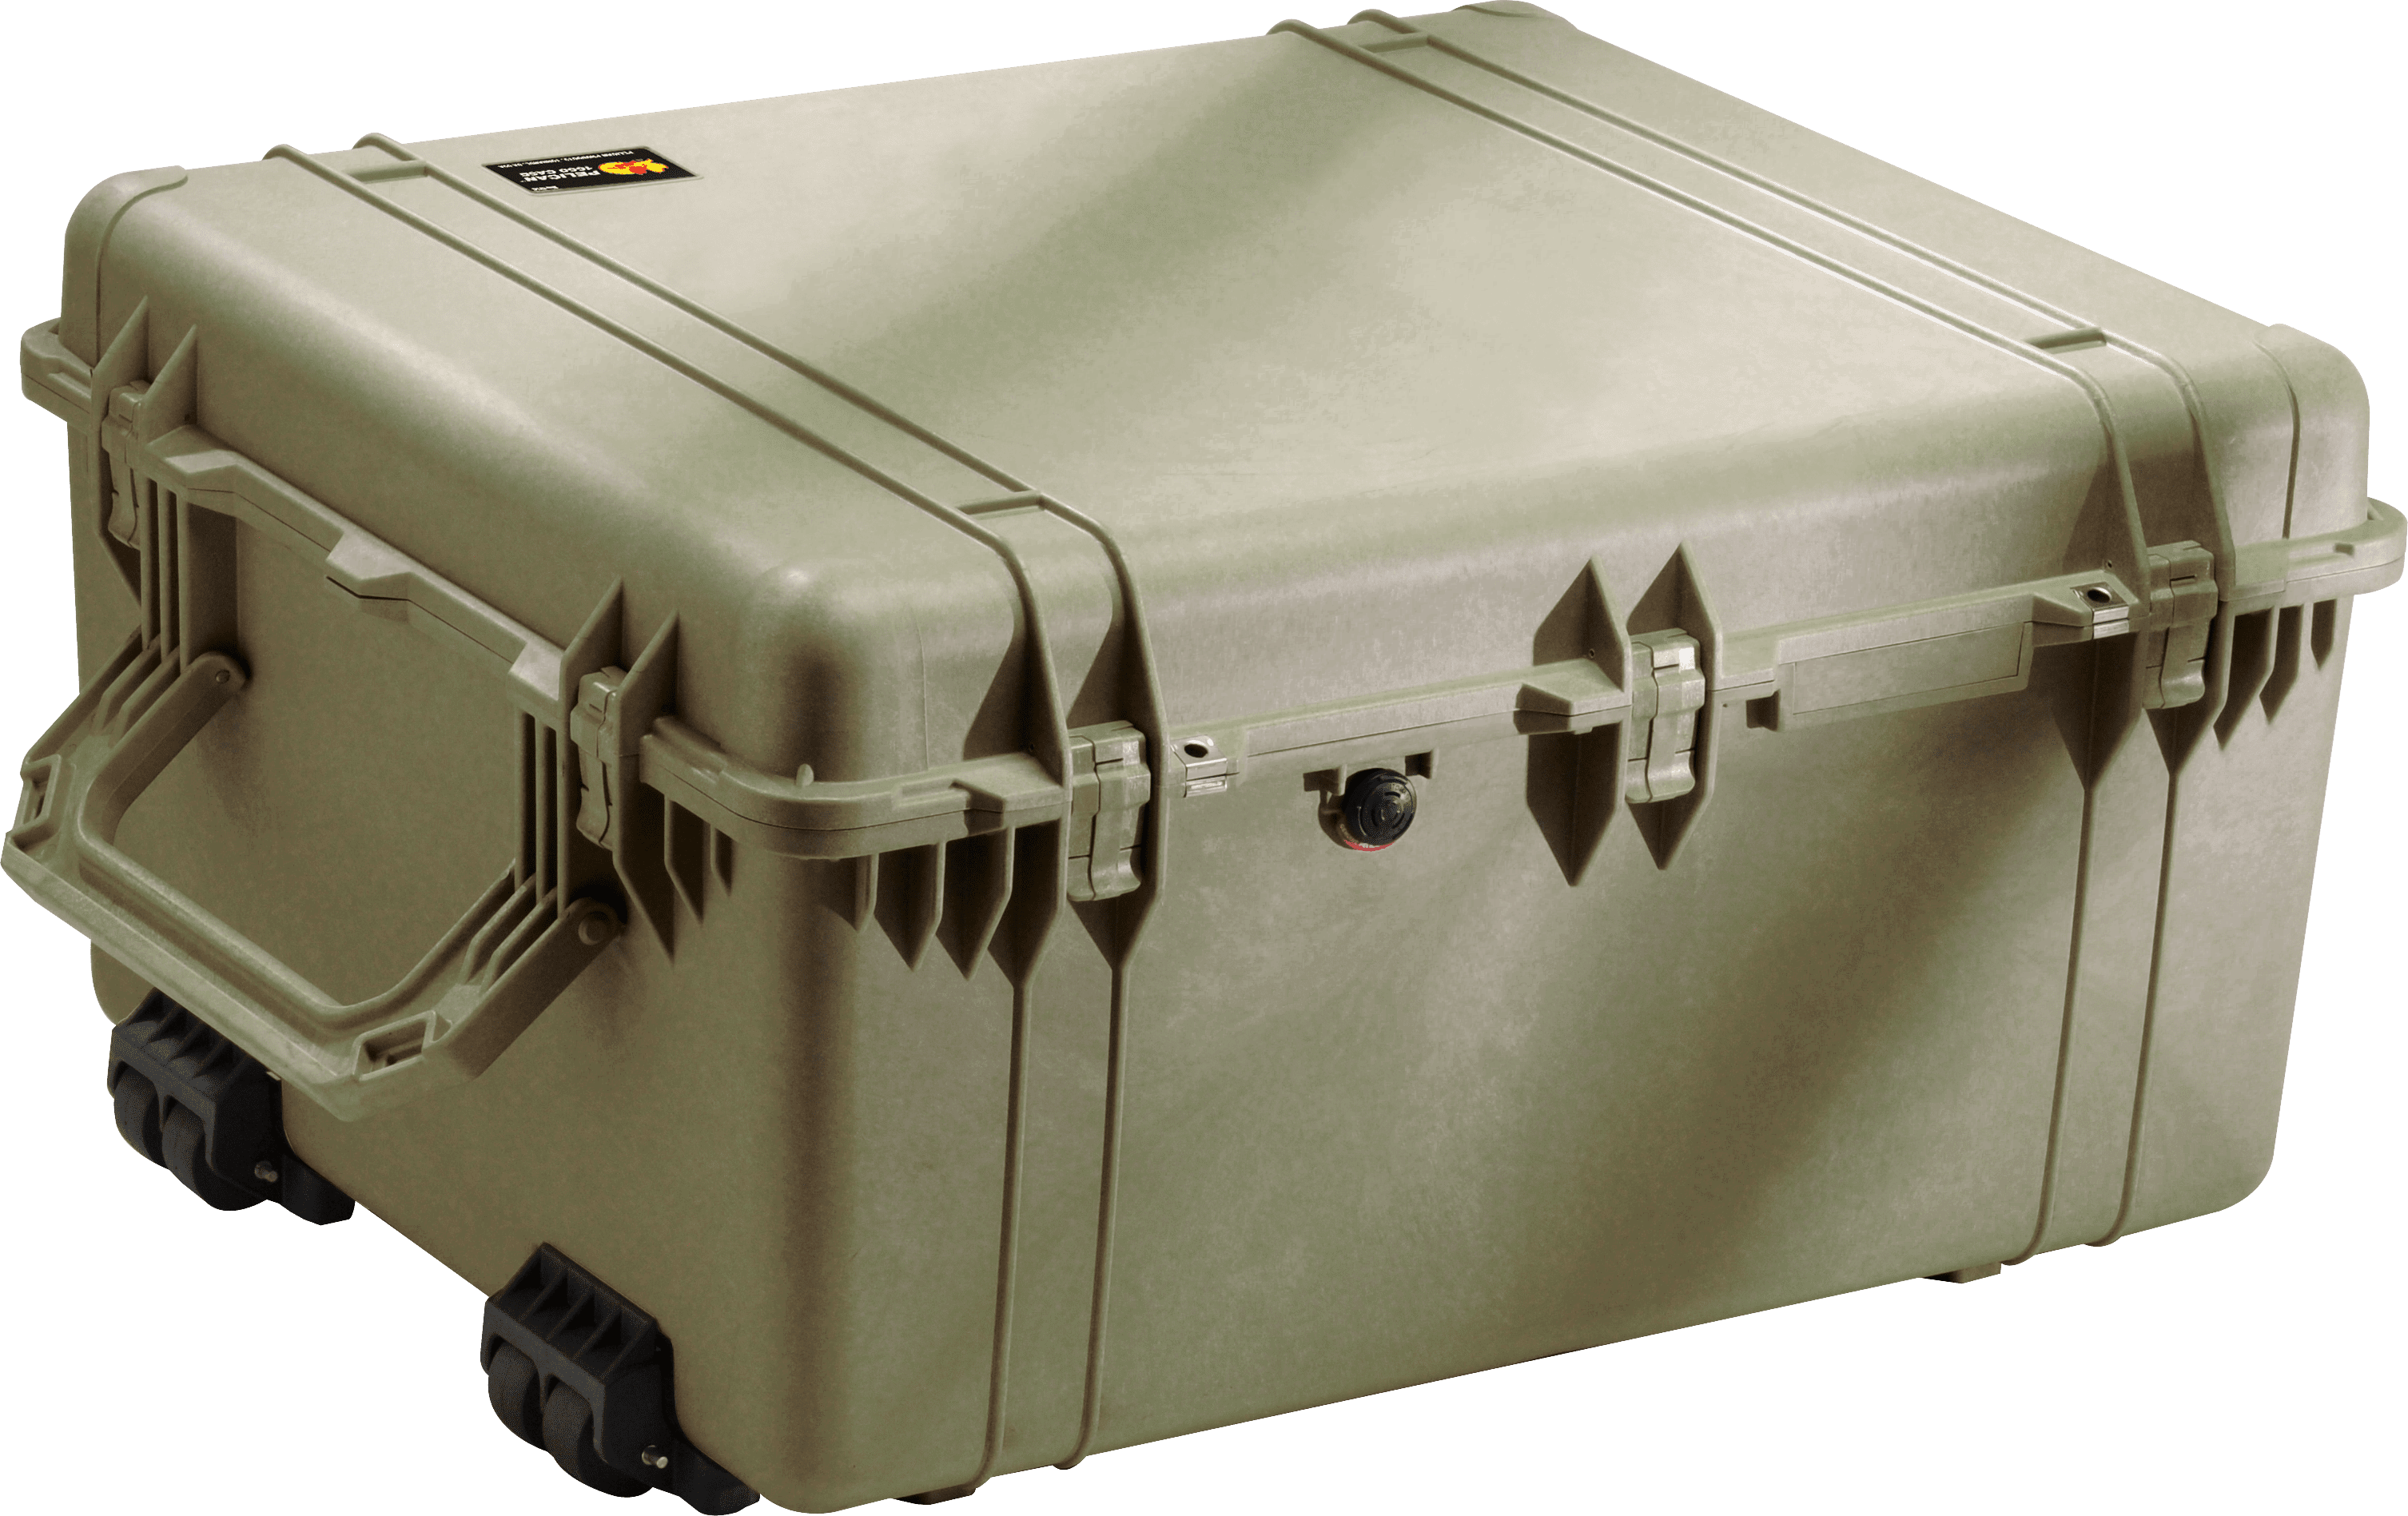 Pelican Products 1690 Protector Transport Case - OD Green, No Foam